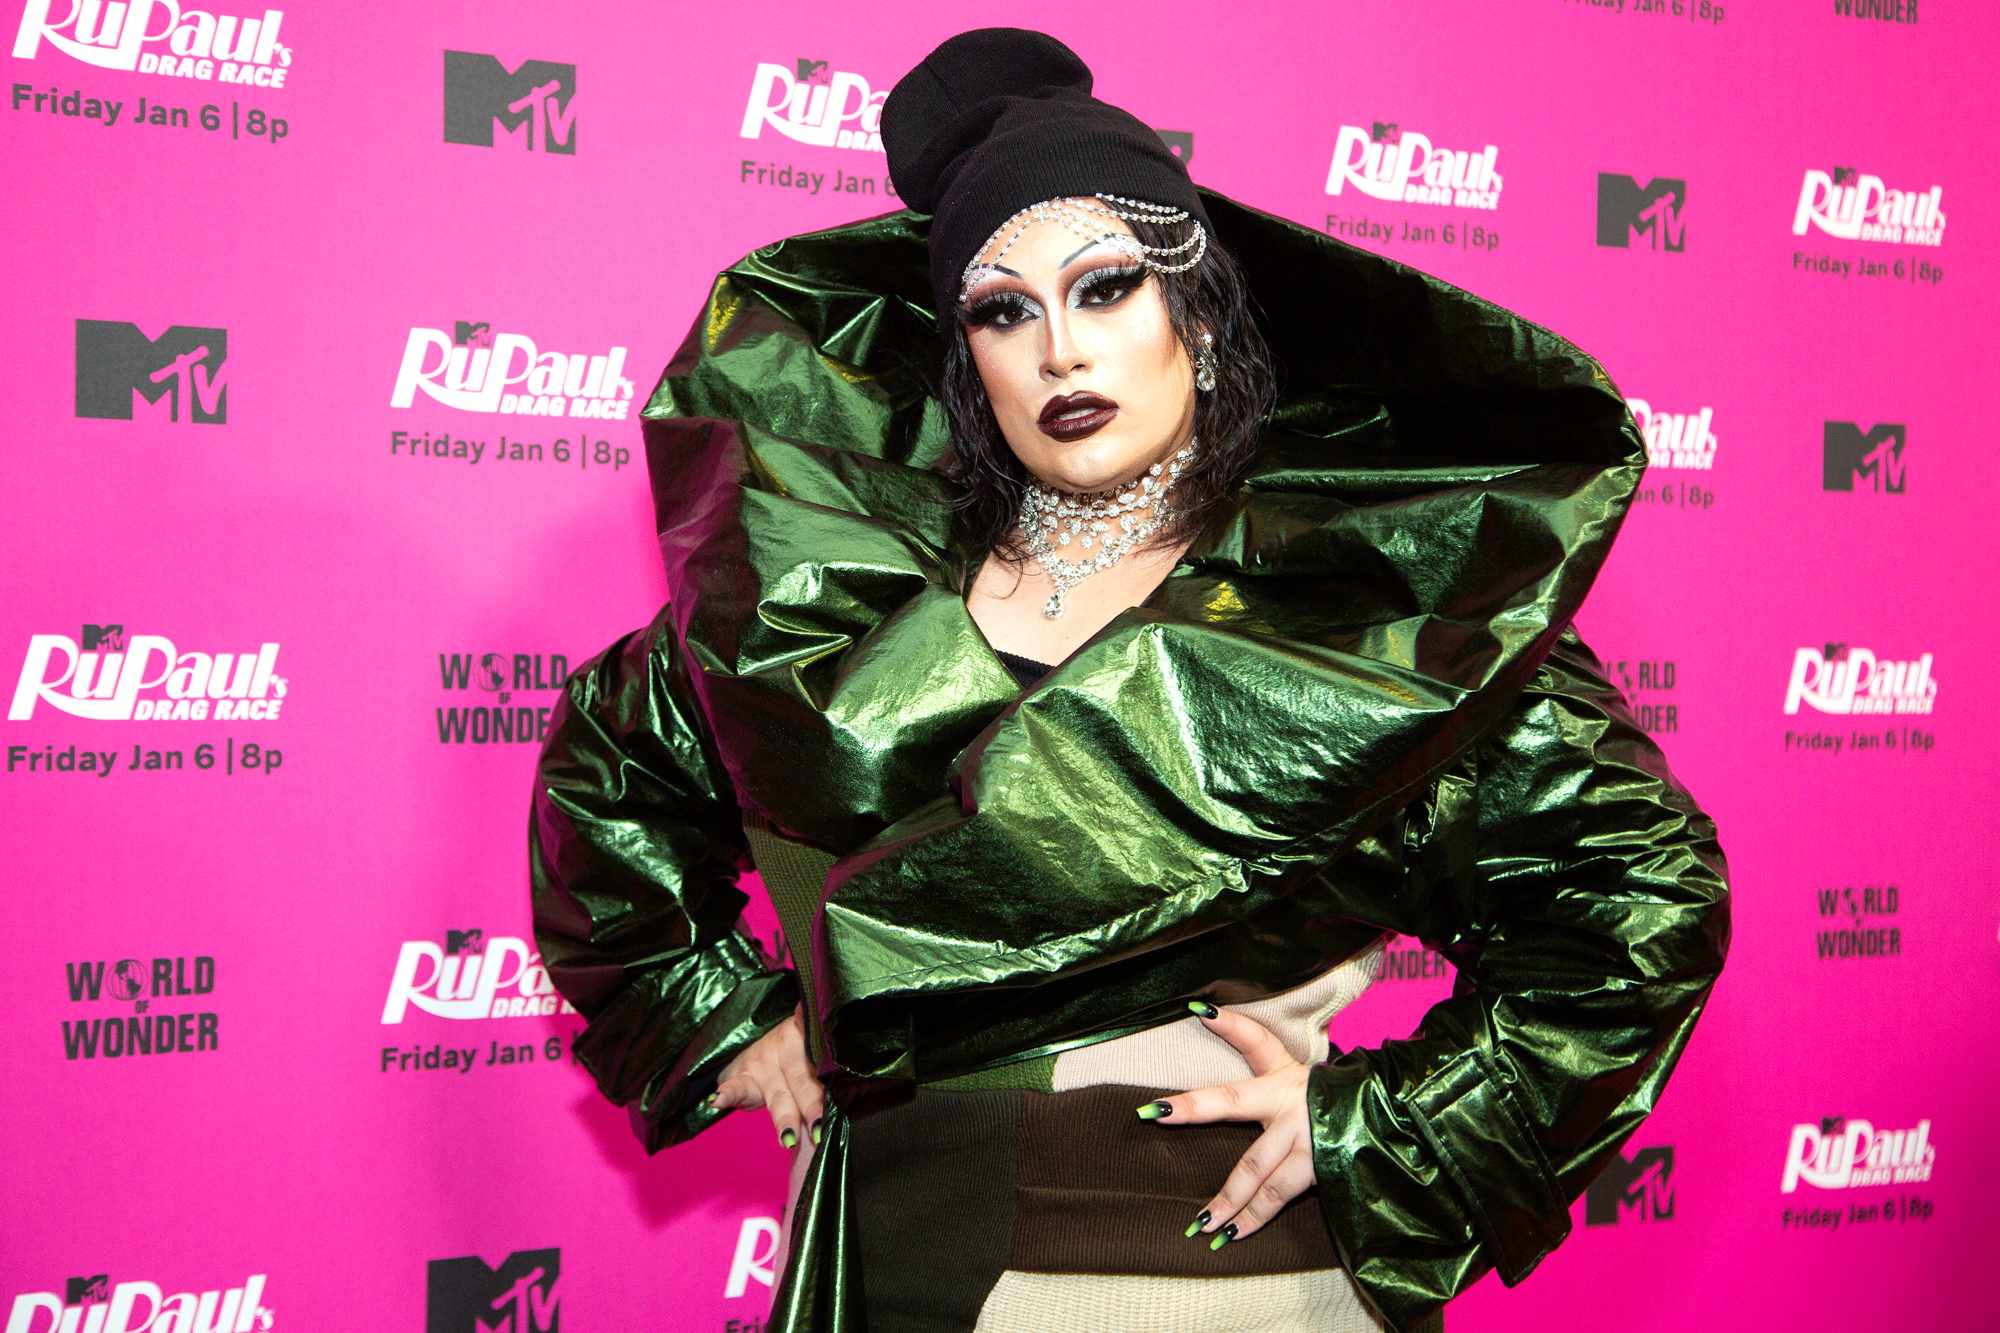 'RuPaul's Drag Race' Season 15 Salina EsTitties wearing a green costume in front of a pink step and repeat. Holding her hands on her hips.